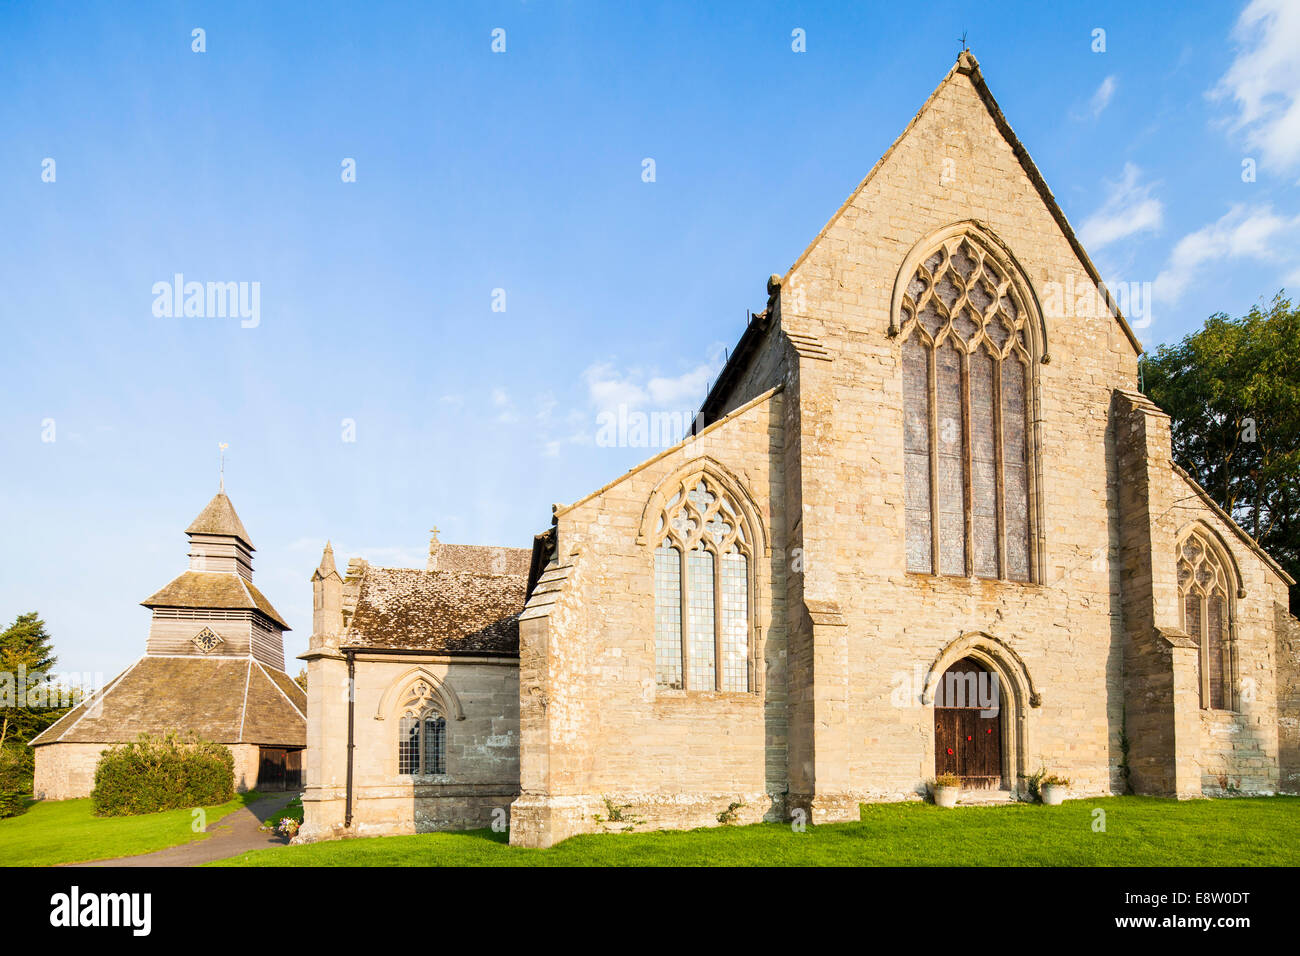 St. Mary's Church and Bell Tower Pembridge village Herefordshire England UK Stock Photo